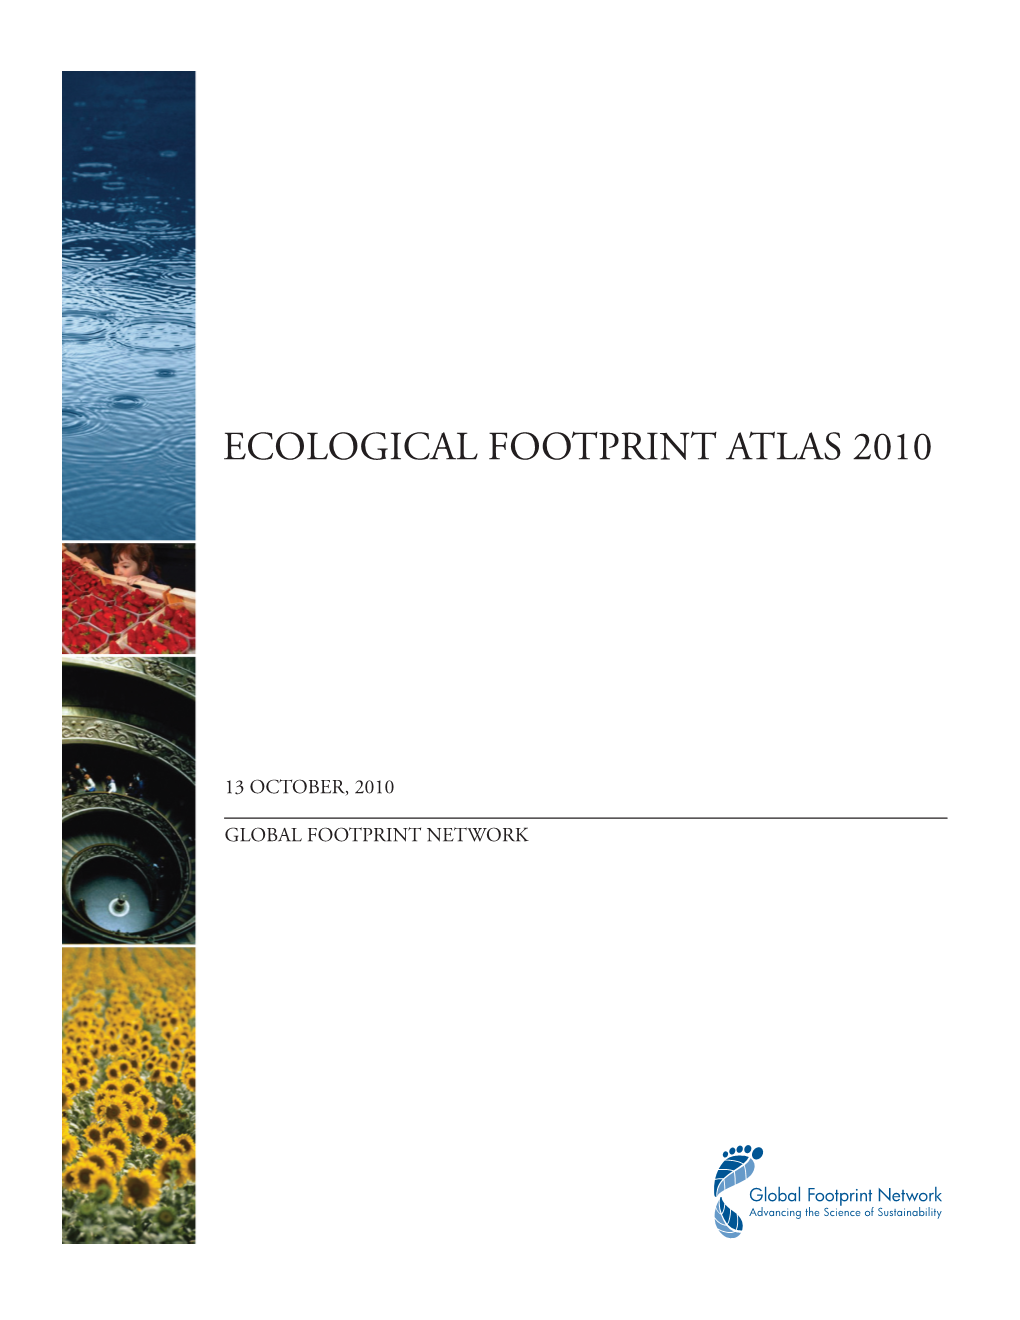 The Ecological Footprint, Biocapacity, and the National Footprint Accounts /9 Linking the National Footprint Accounts with Ecosystem Services /10